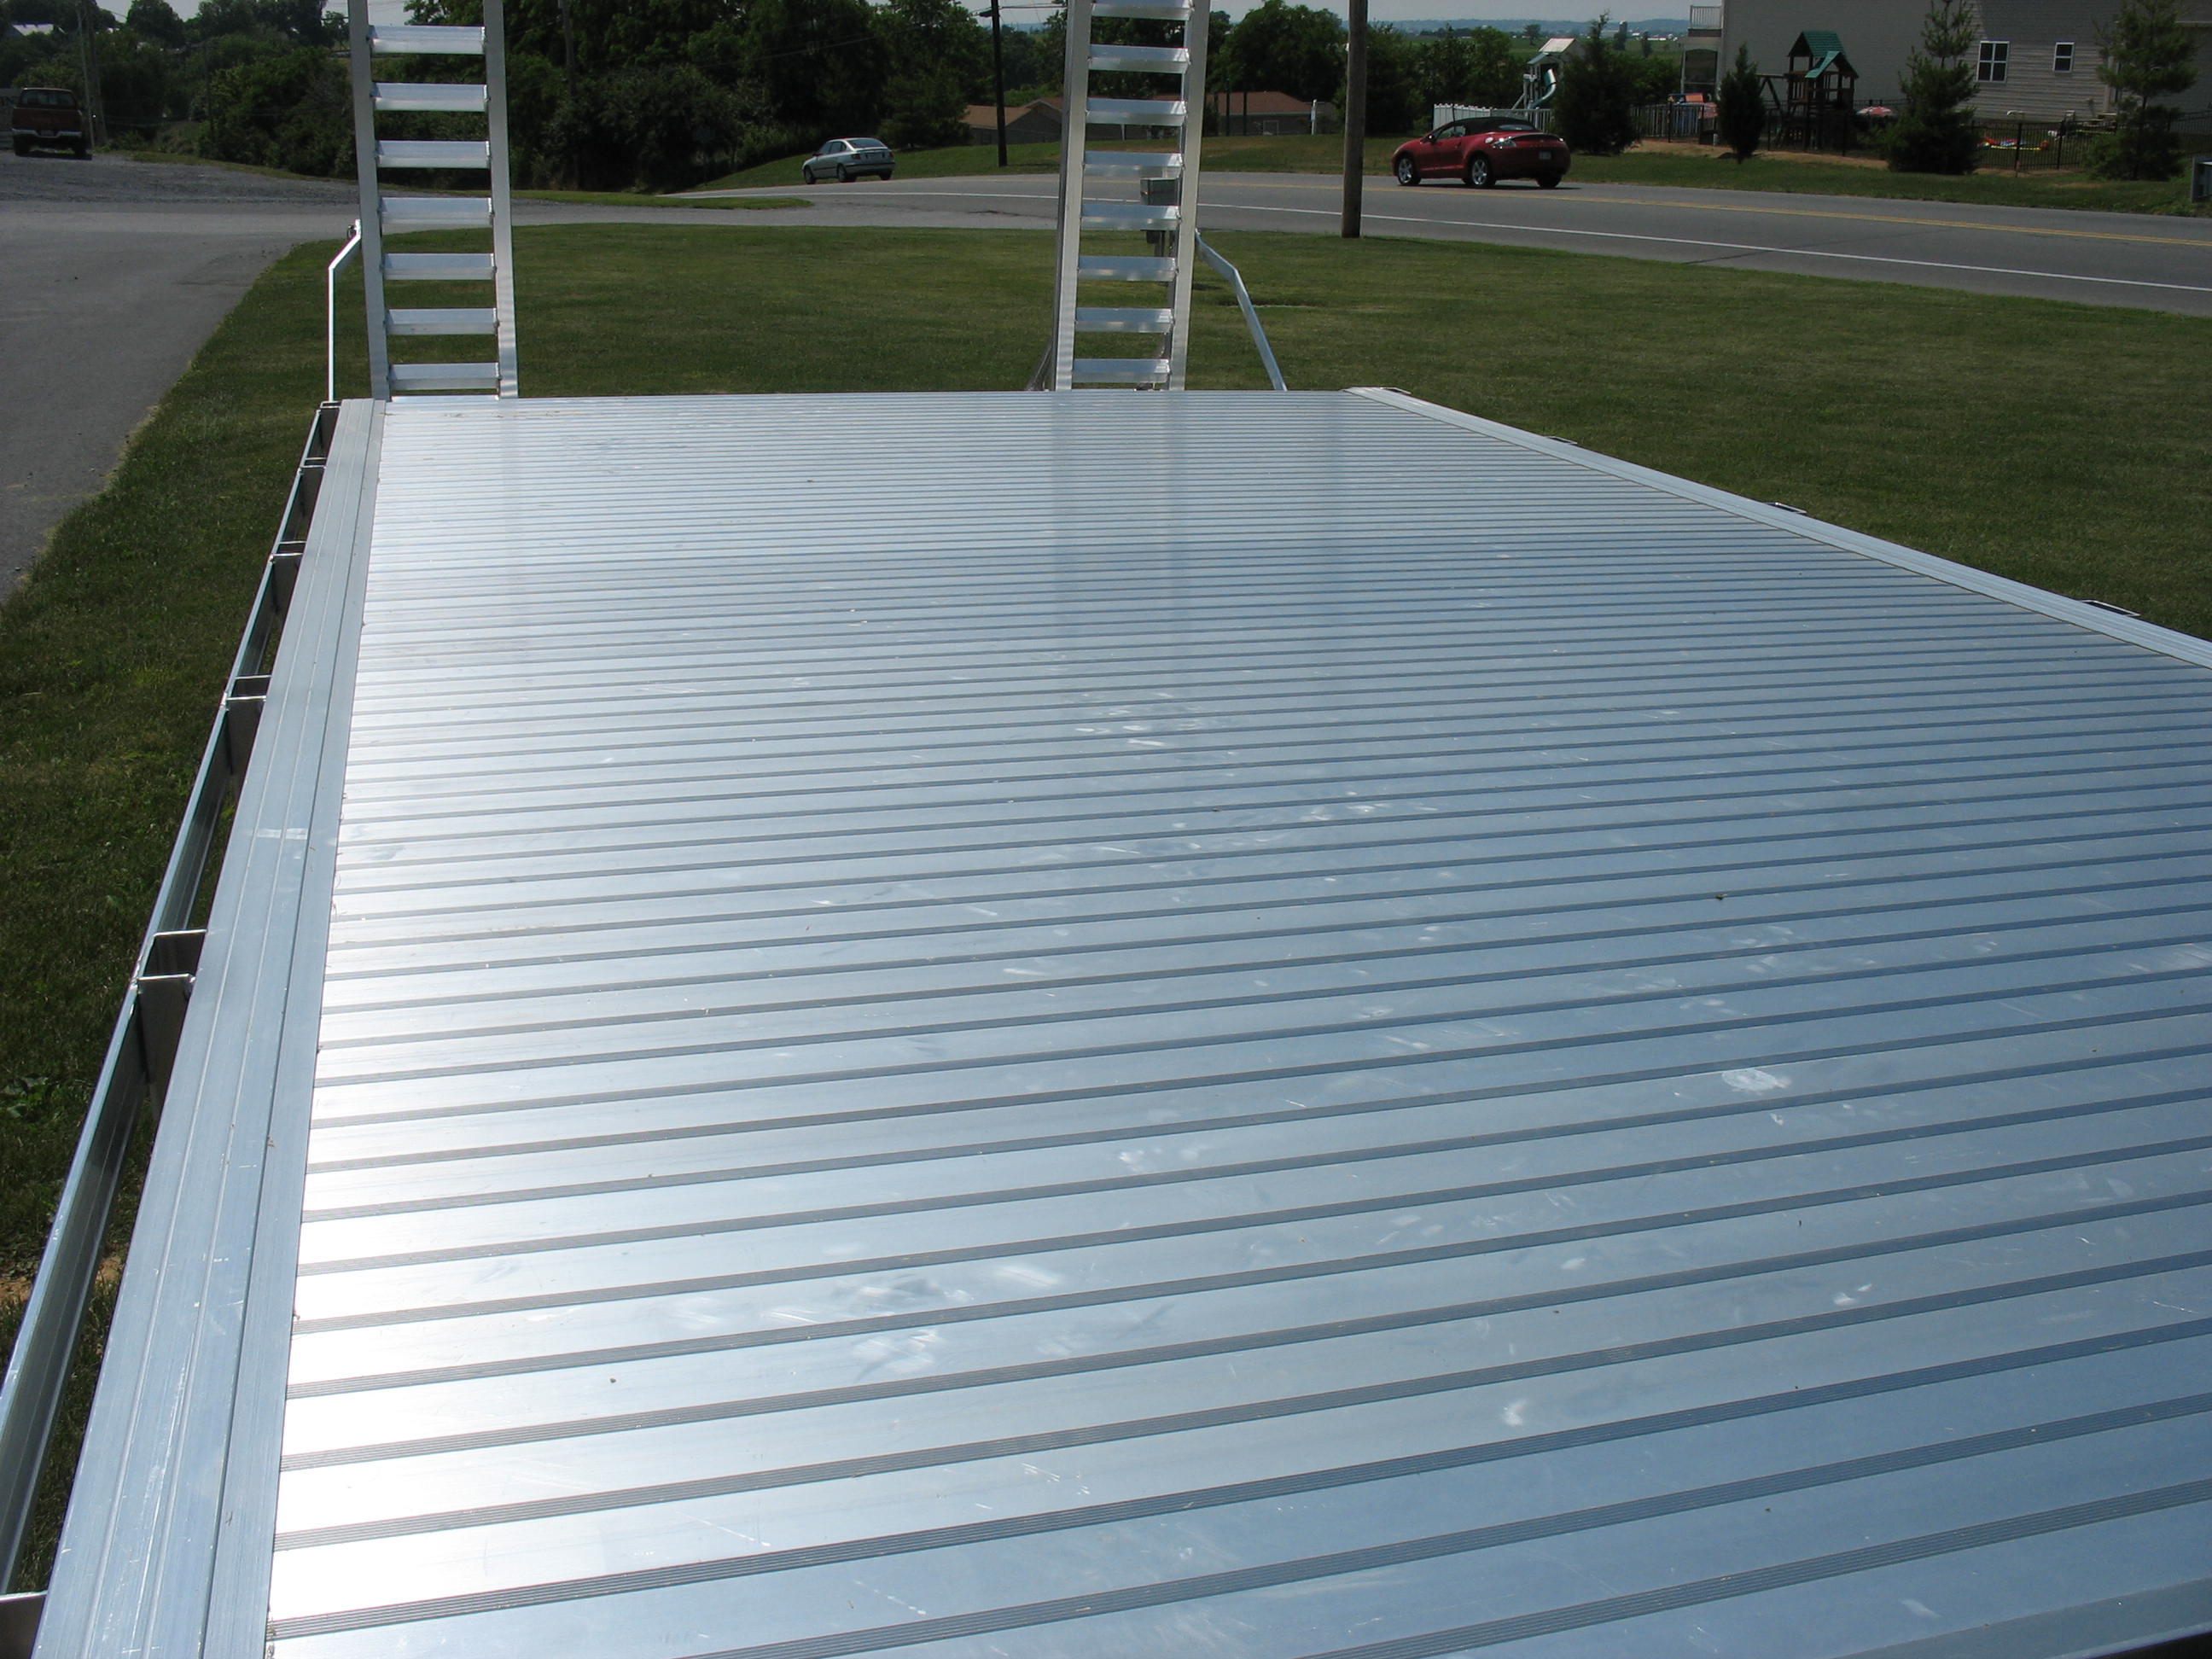 Extruded Aluminum Deck Boards Decks Ideas throughout sizing 2592 X 1944